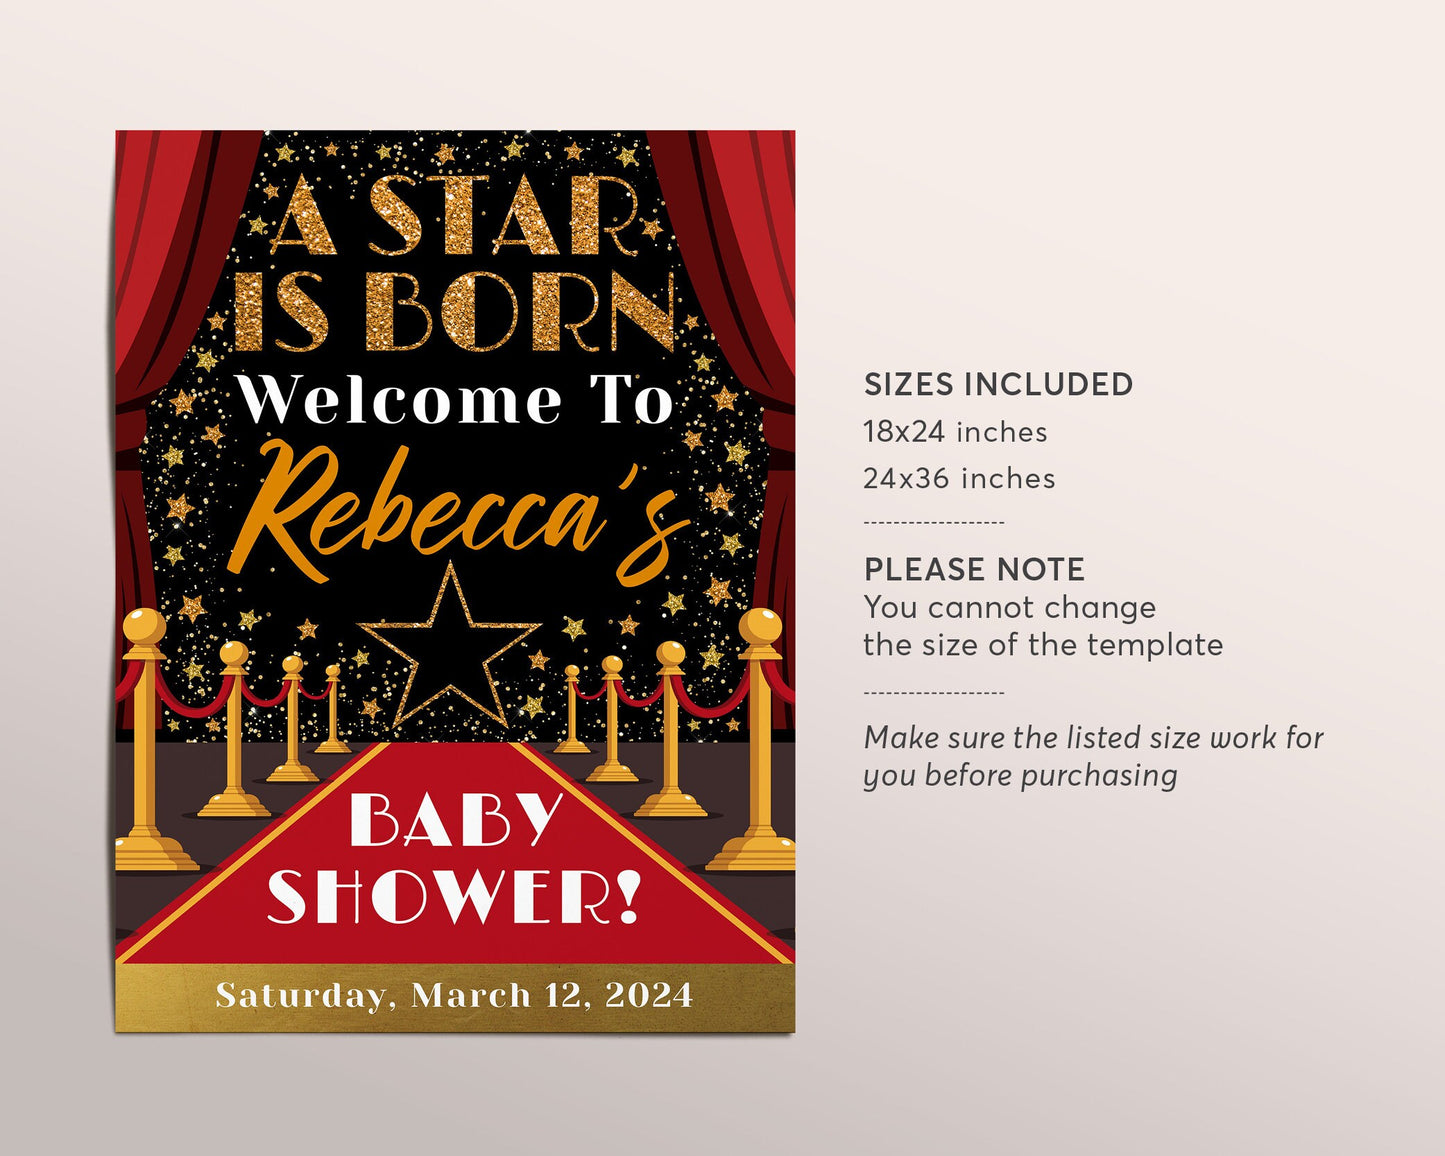 Red Carpet Baby Shower Welcome Sign Editable Template, A Star Is Born Hollywood Theme Unisex Sprinkle Party Poster VIP Access Decor